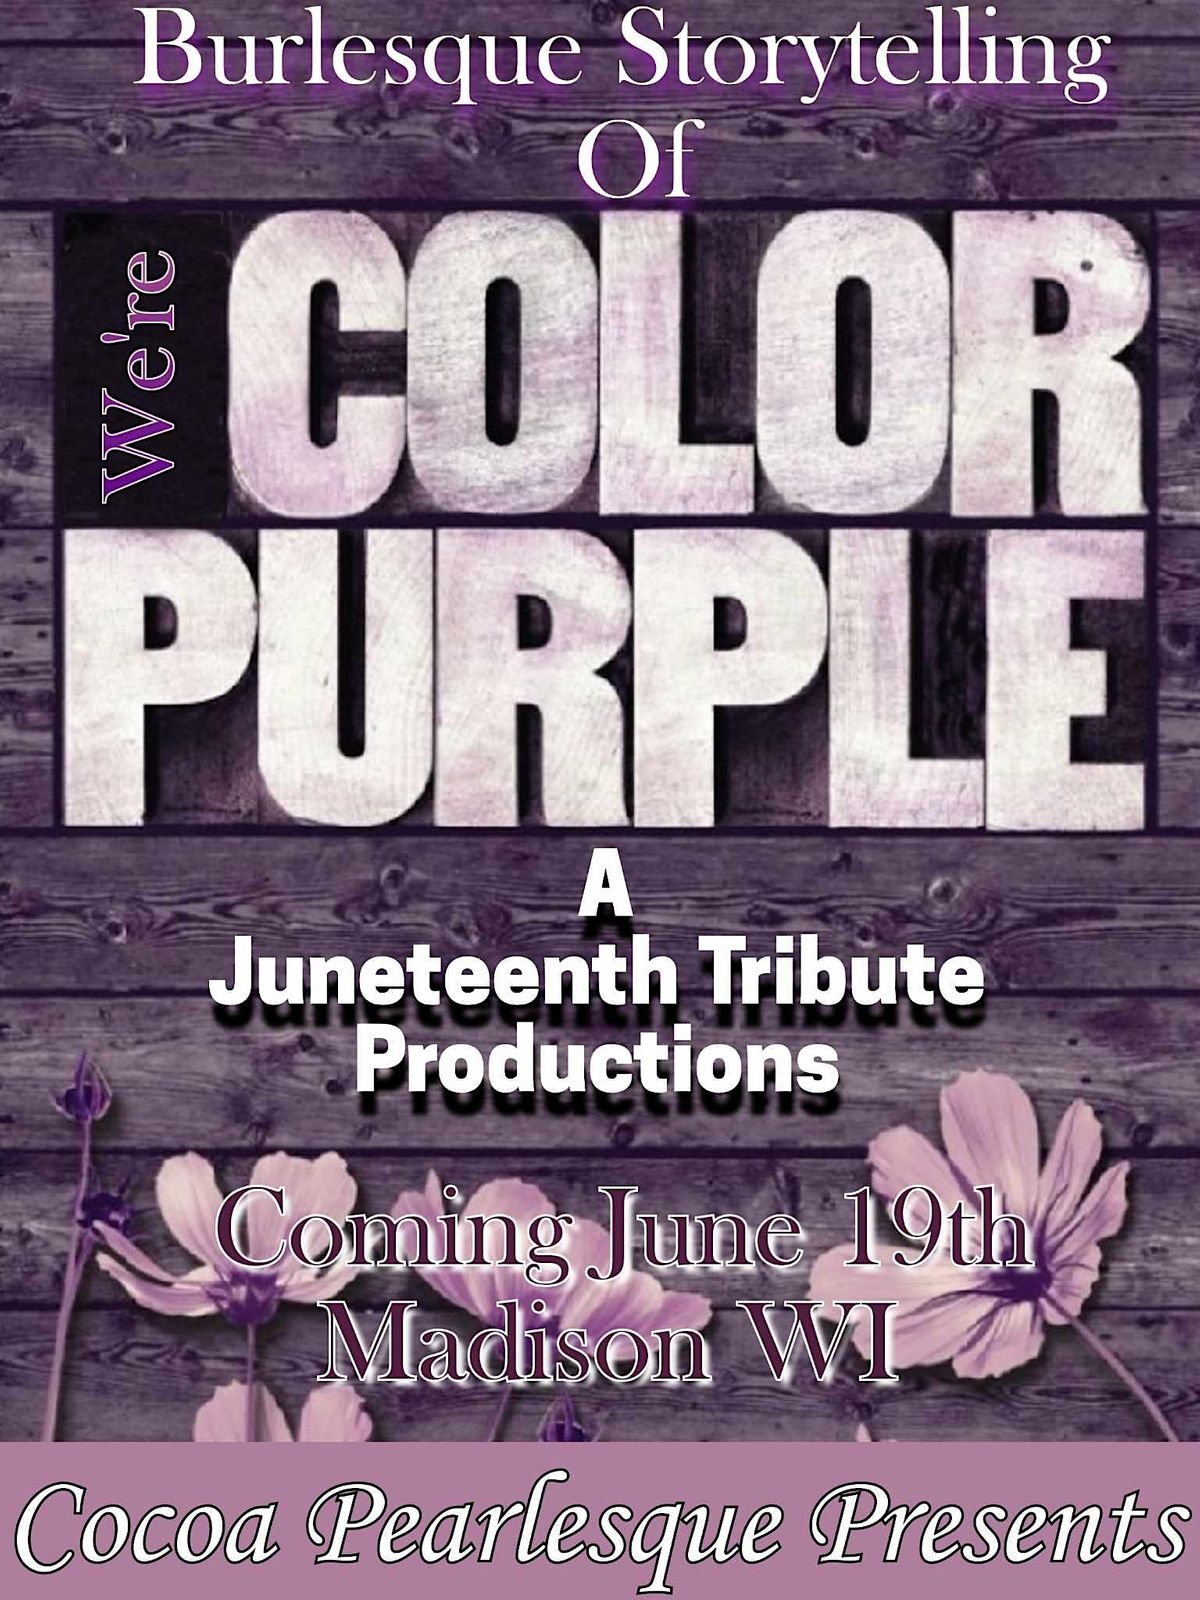 The Burlesque Storytelling Of {We're The Color Purple} Juneteenth Show